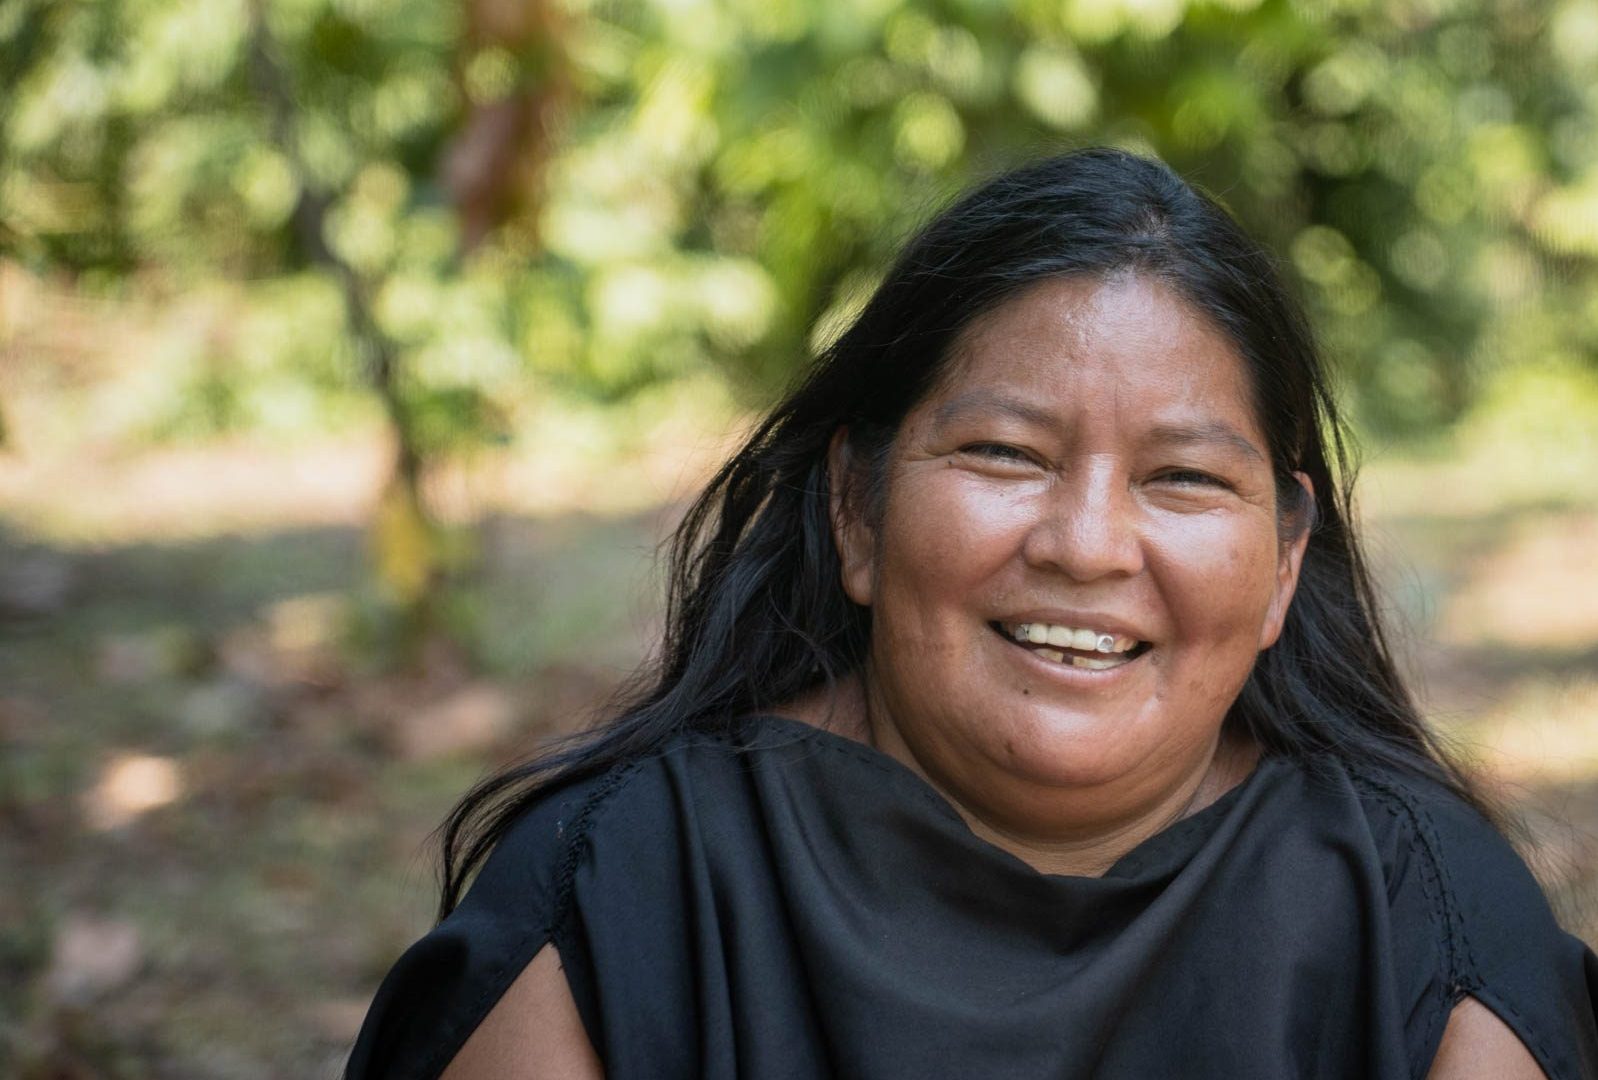 A portrait of María, an Asháninka community member who has worked with Cool Earth on sustainable income generation initiatives including cacao growing.